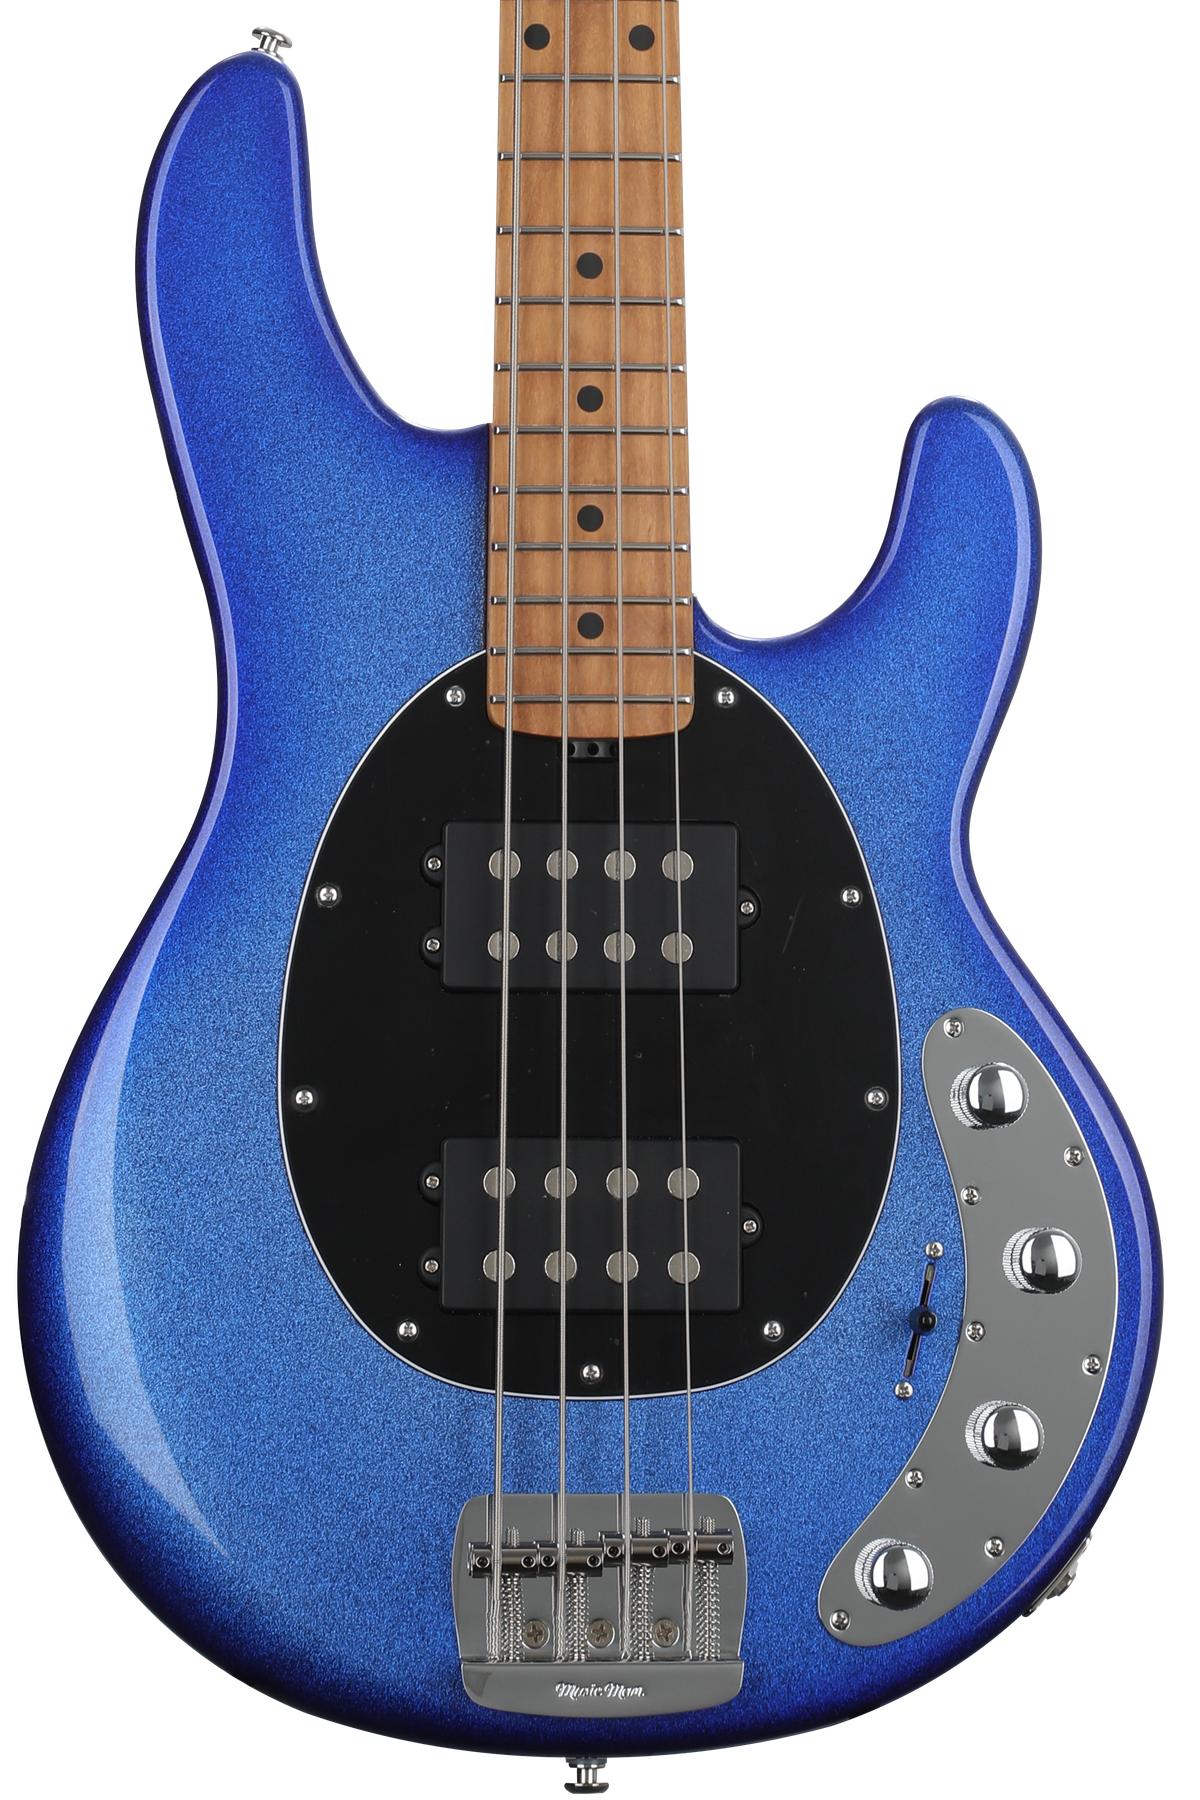 Ernie Ball Music Man StingRay Special 4 HH Bass Guitar - Pacific Blue  Sparkle, Sweetwater Exclusive